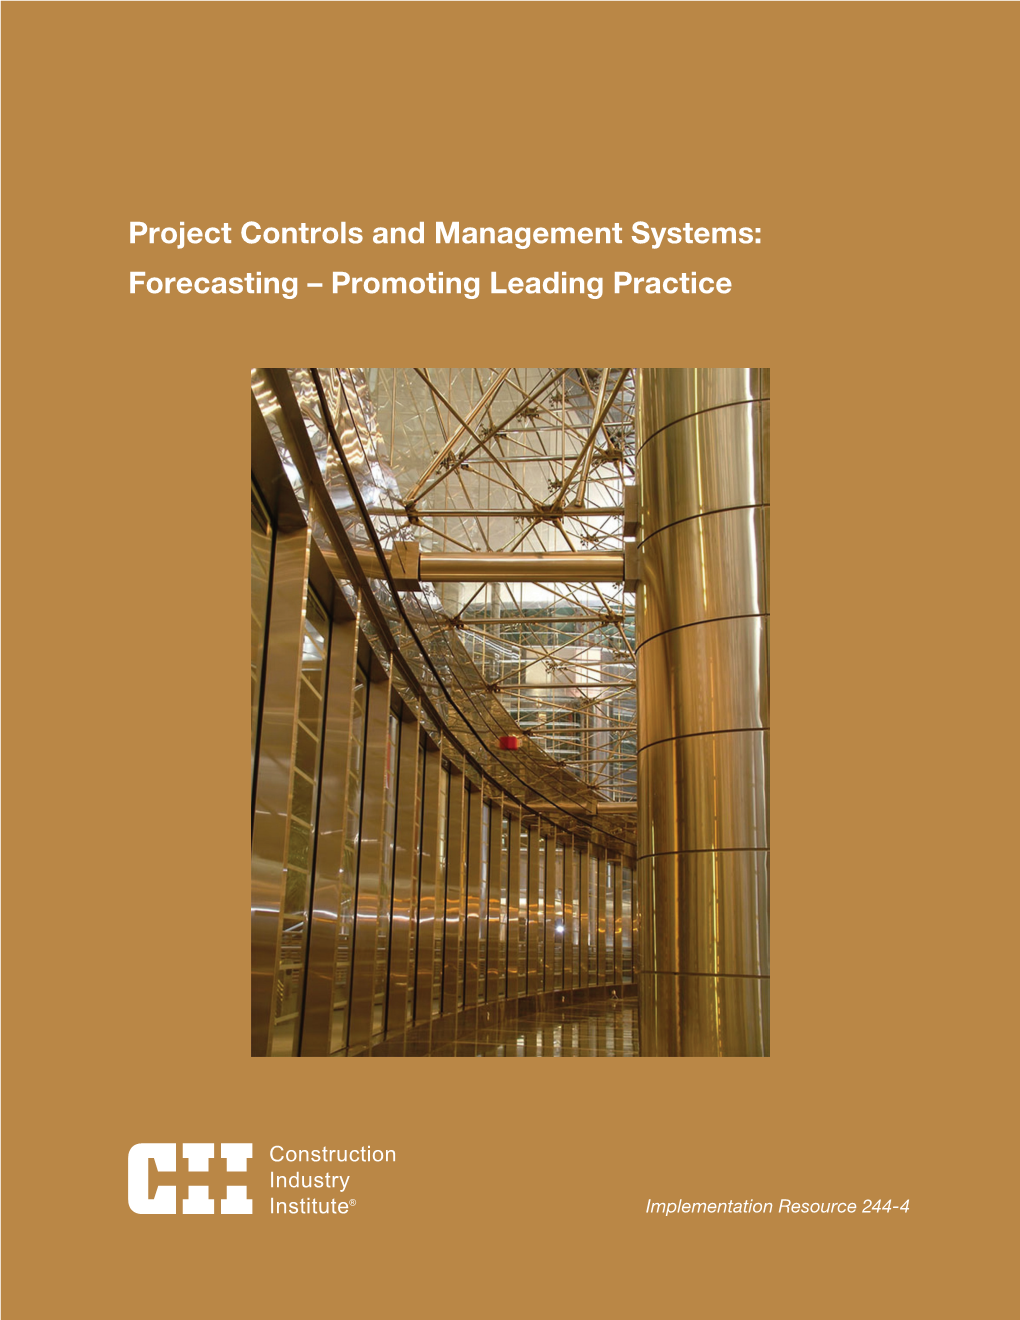 Project Controls and Management Systems: Forecasting – Promoting Leading Practice